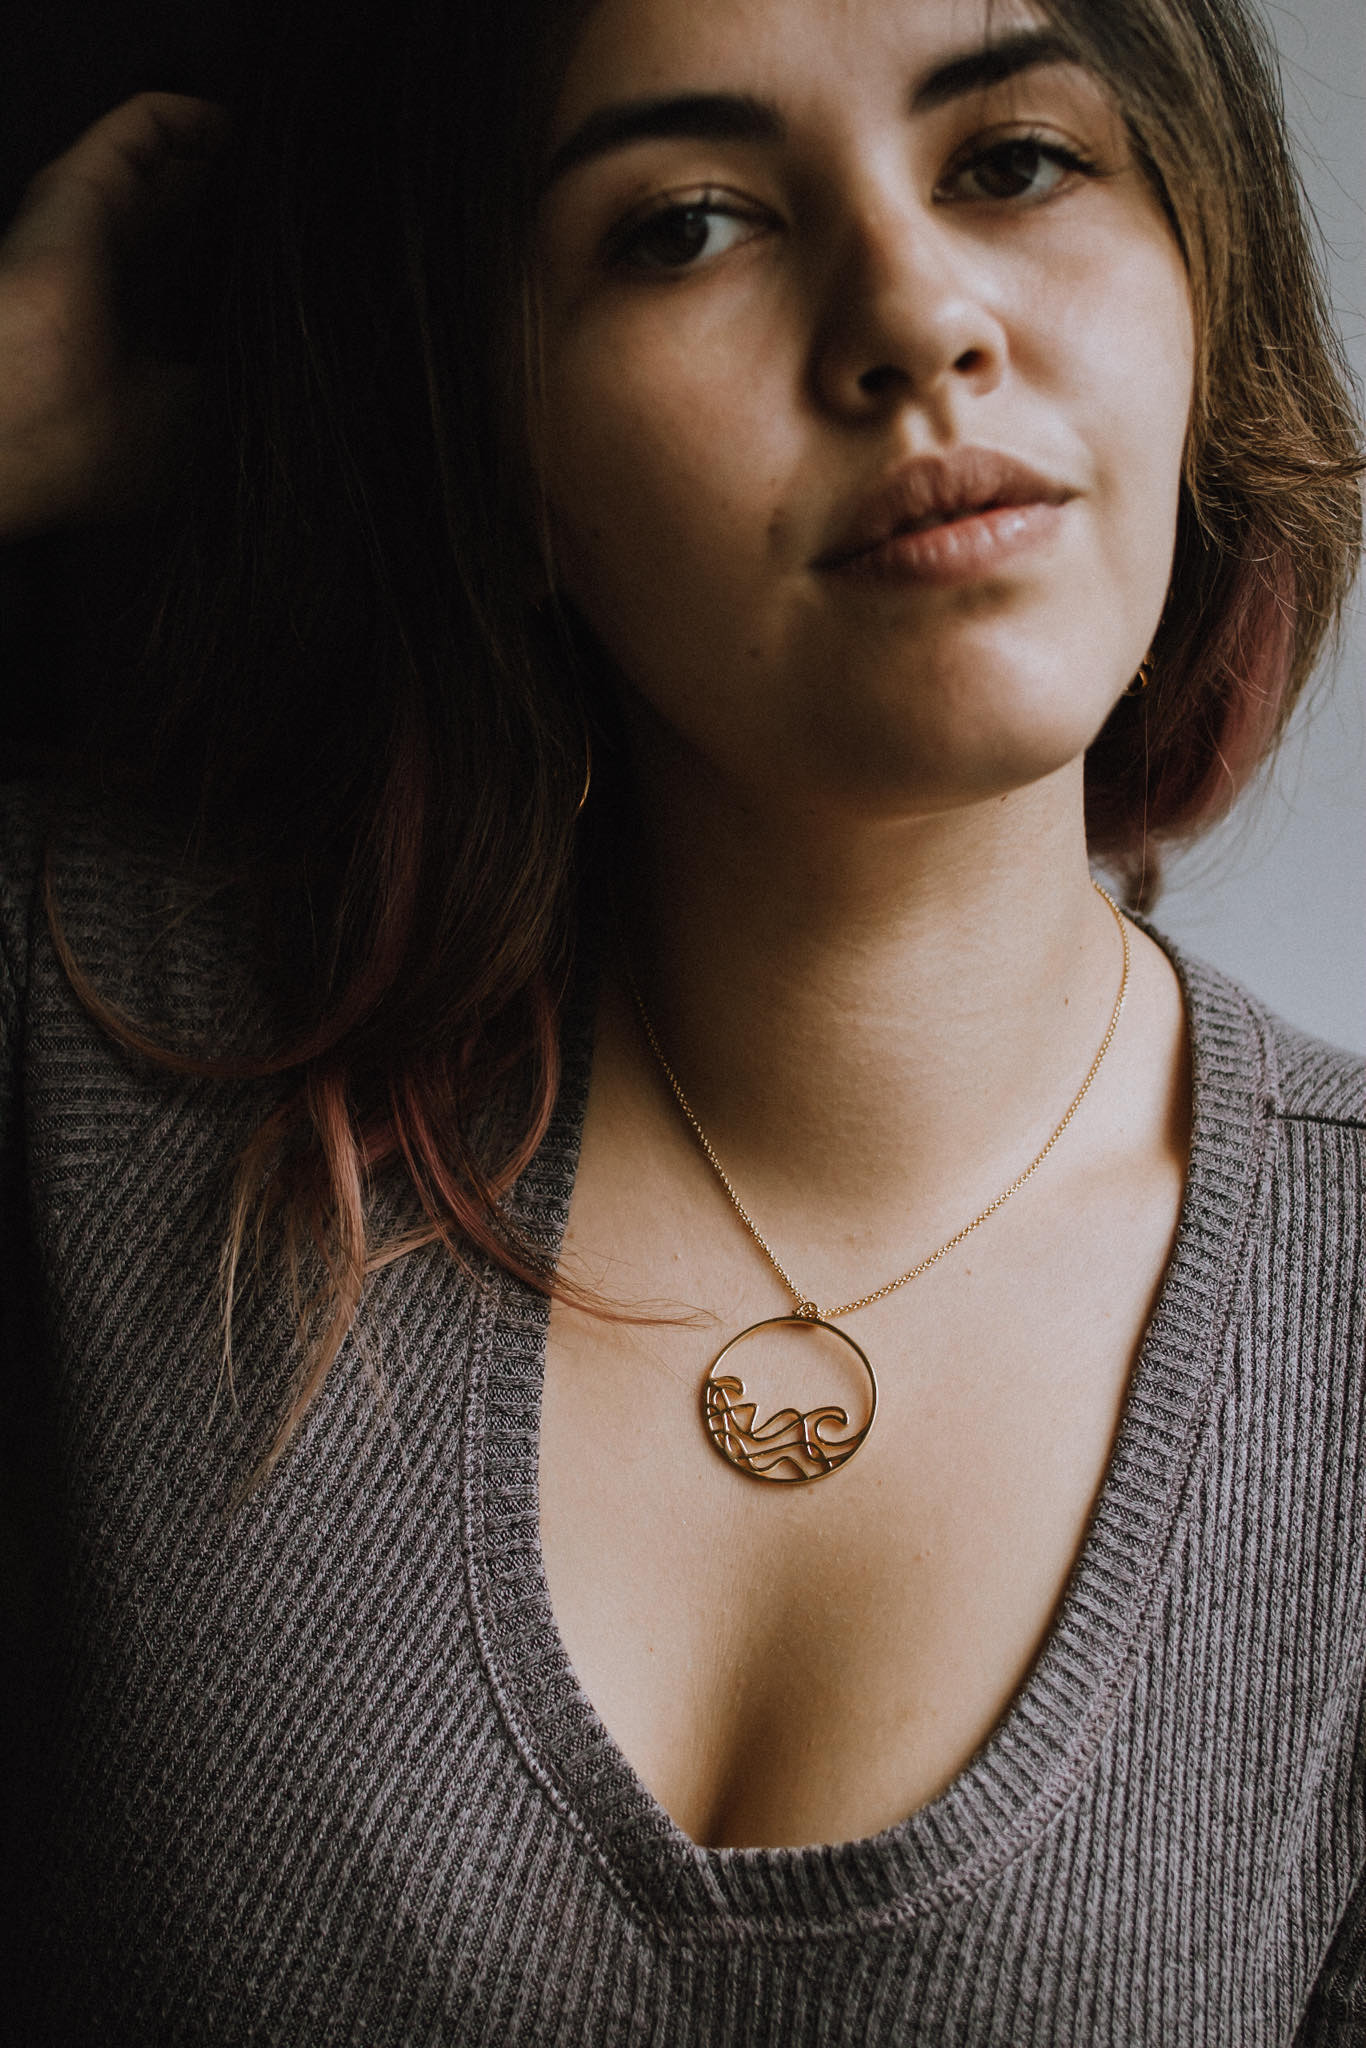 model wearing gold  Sombrio beach  round wave necklace. surf wave pendant on chain necklace.